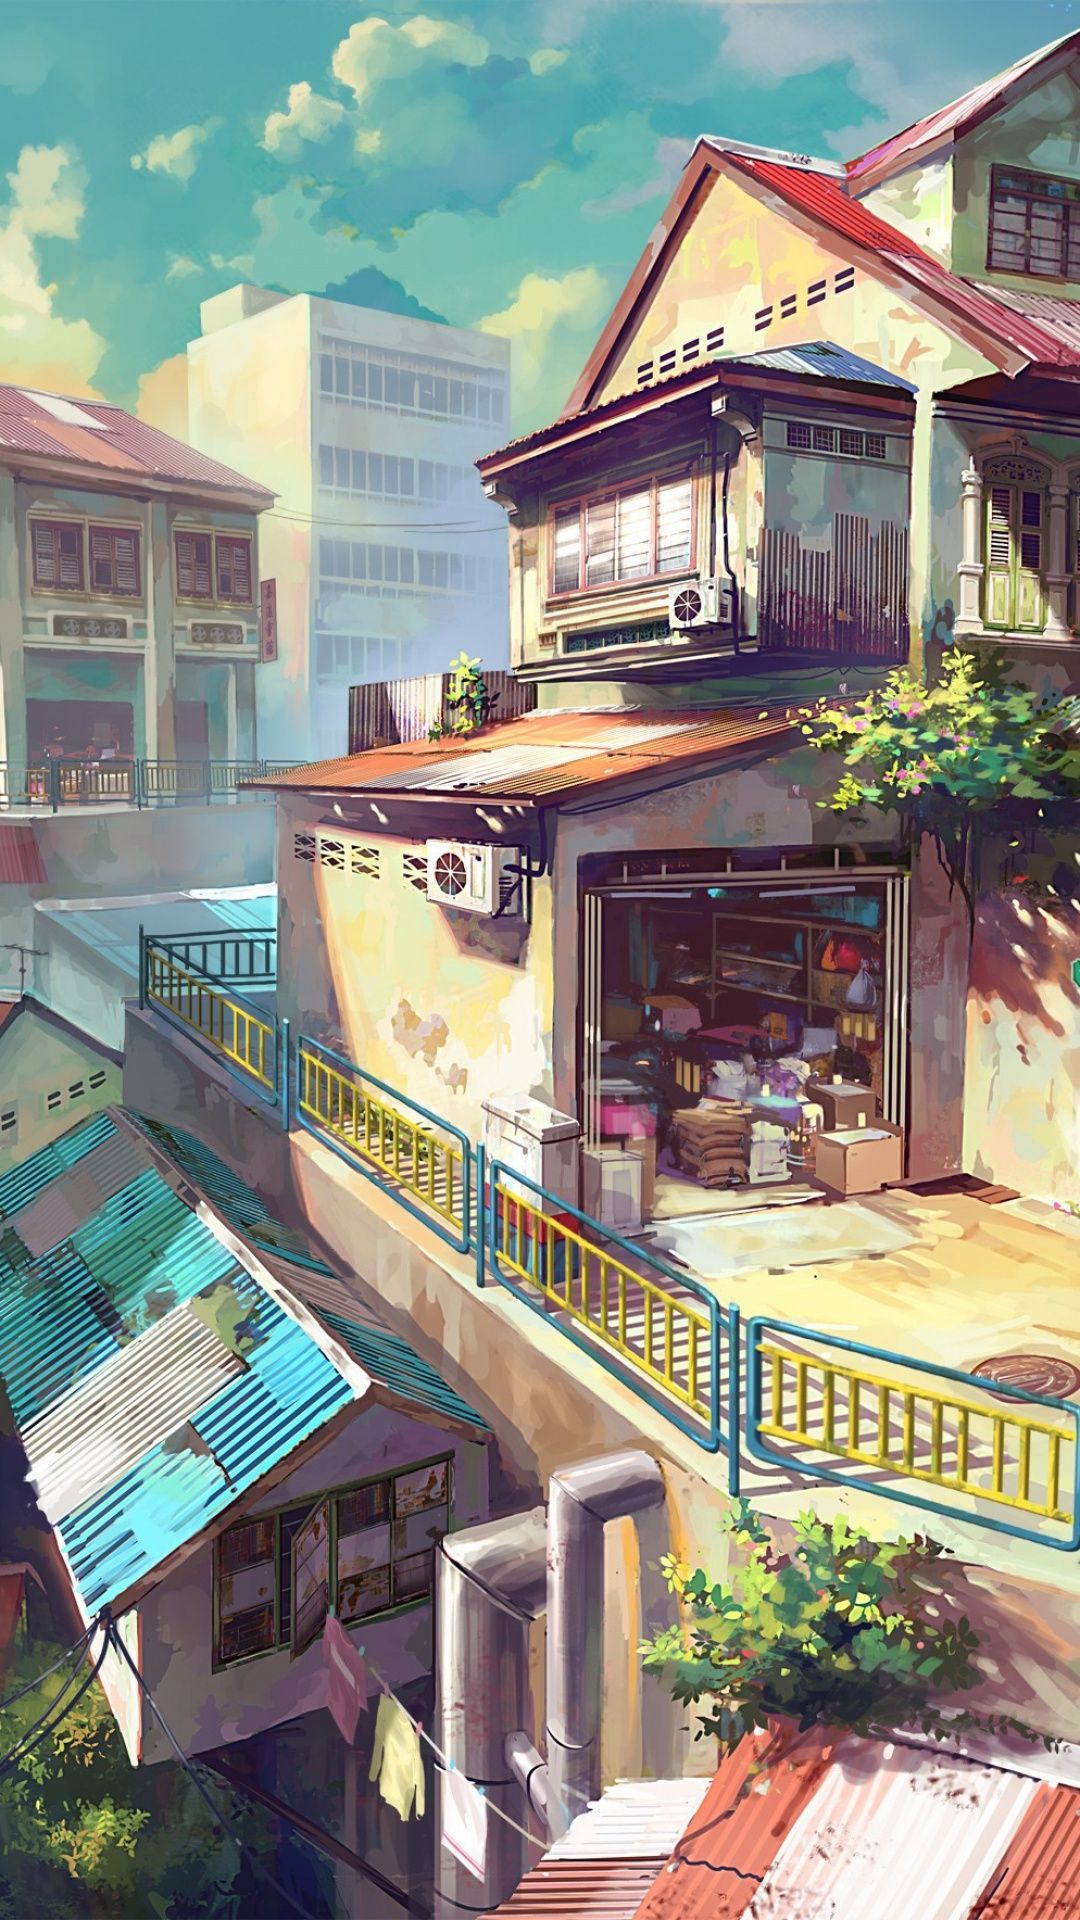 A painting of houses and buildings in the city - Japan, anime city